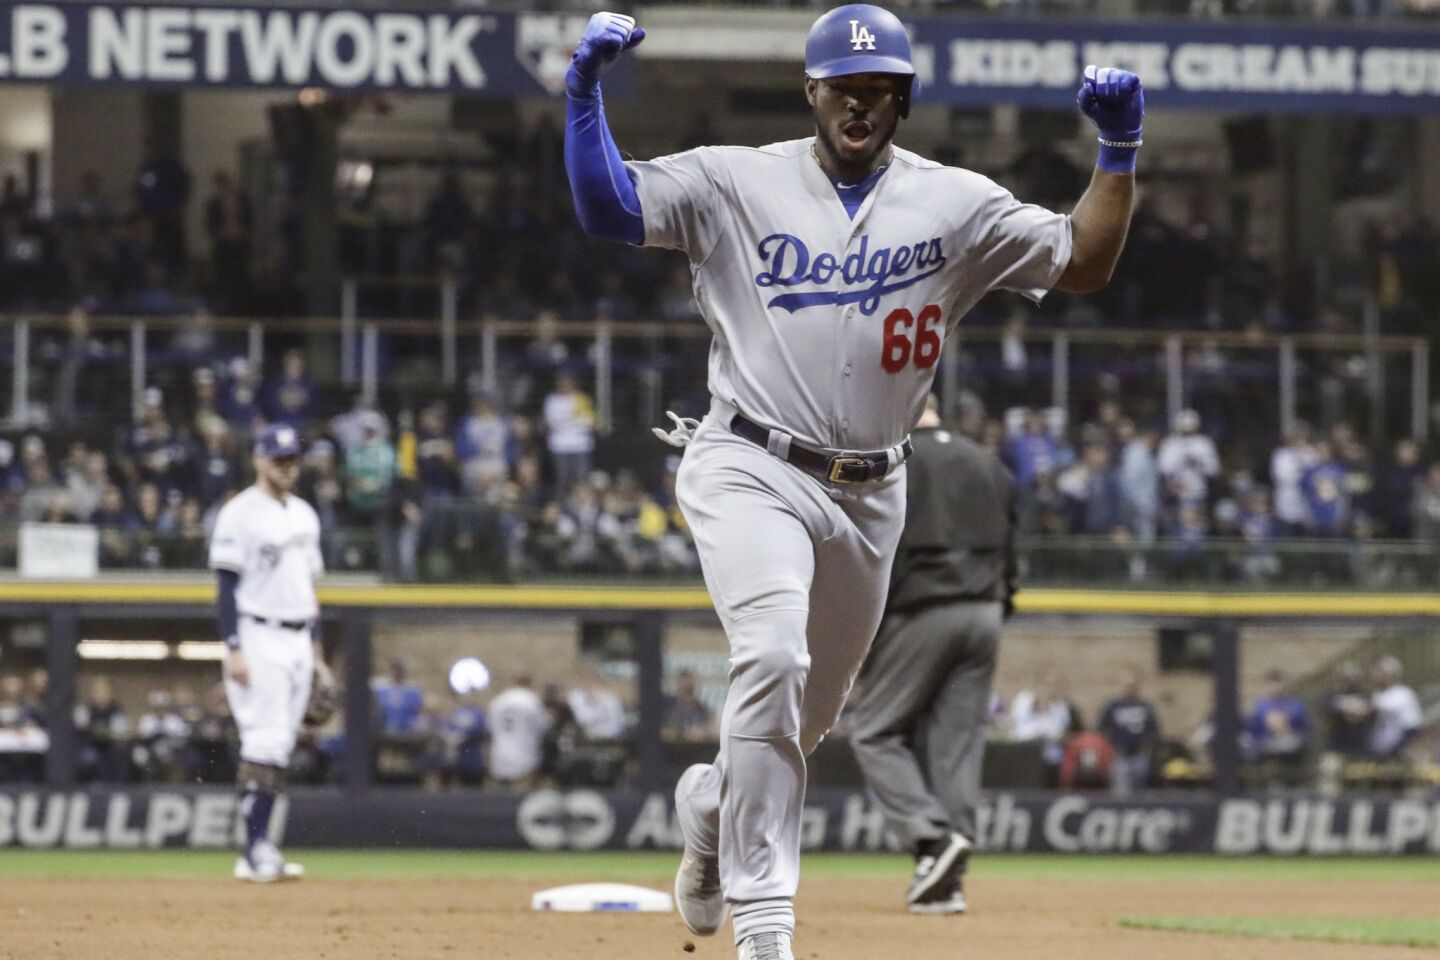 Dodgers Yasiel Puig celebrates after hitting a three run homerun in the 6th inning.